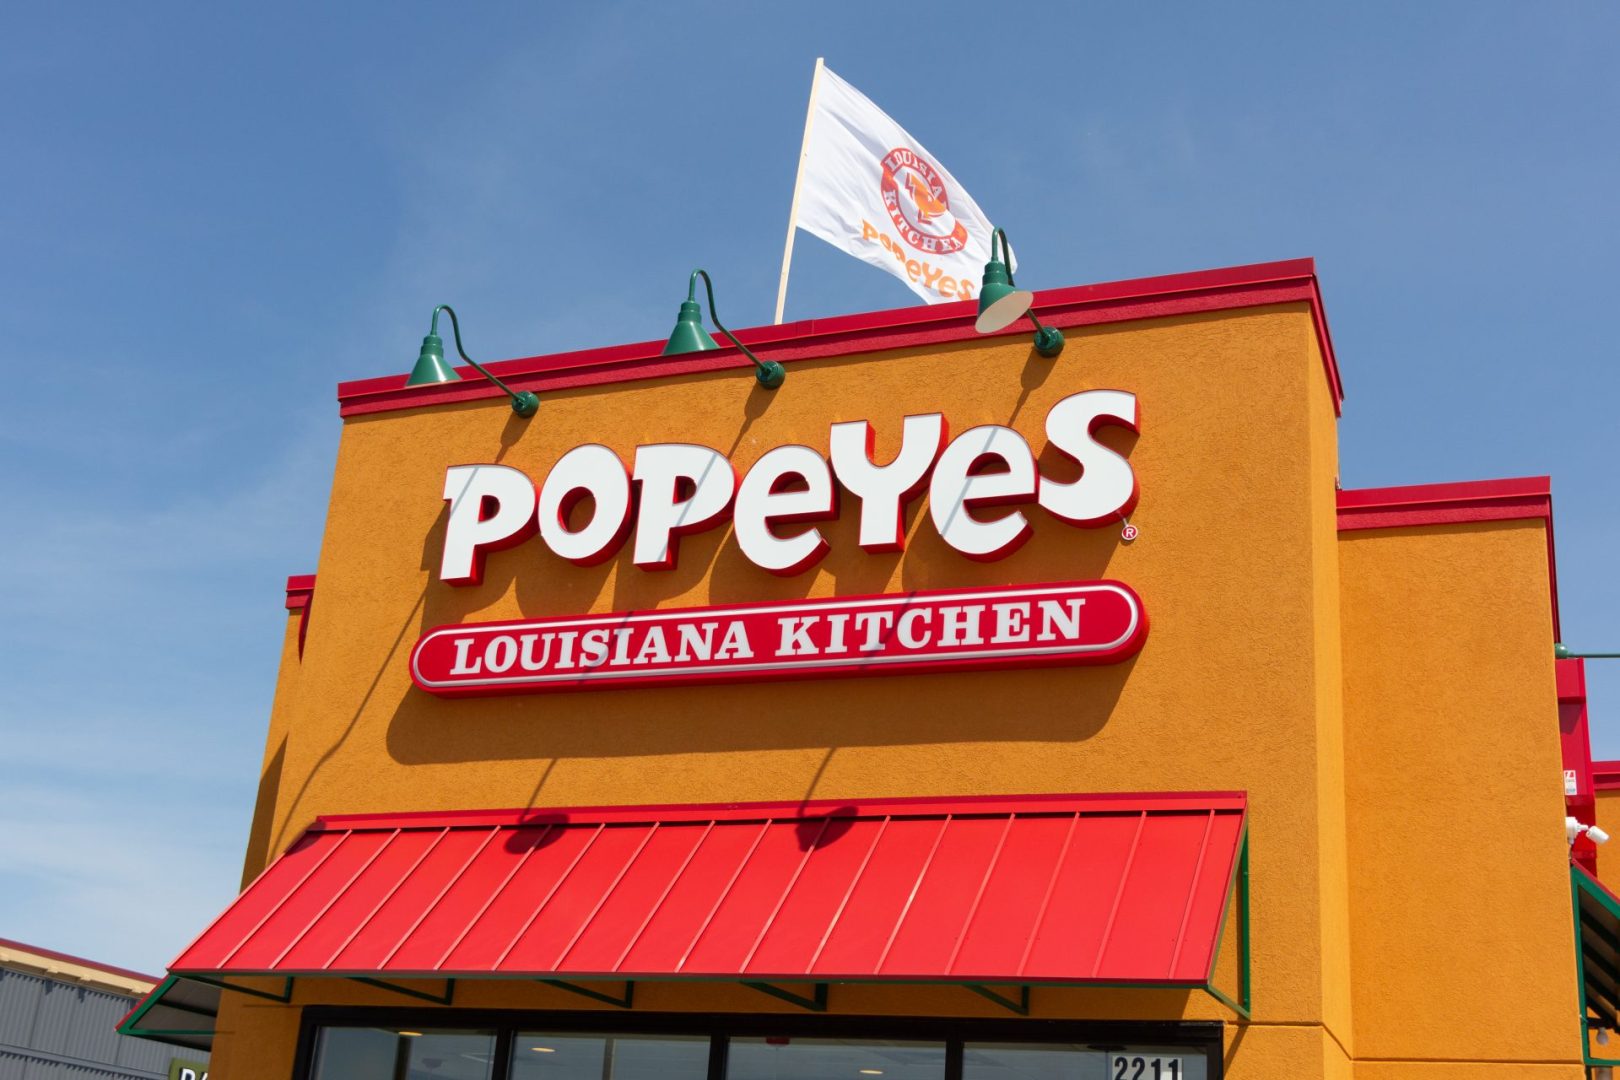 Wrong order? Woman sues Popeyes after 3 employees snatch her hair out